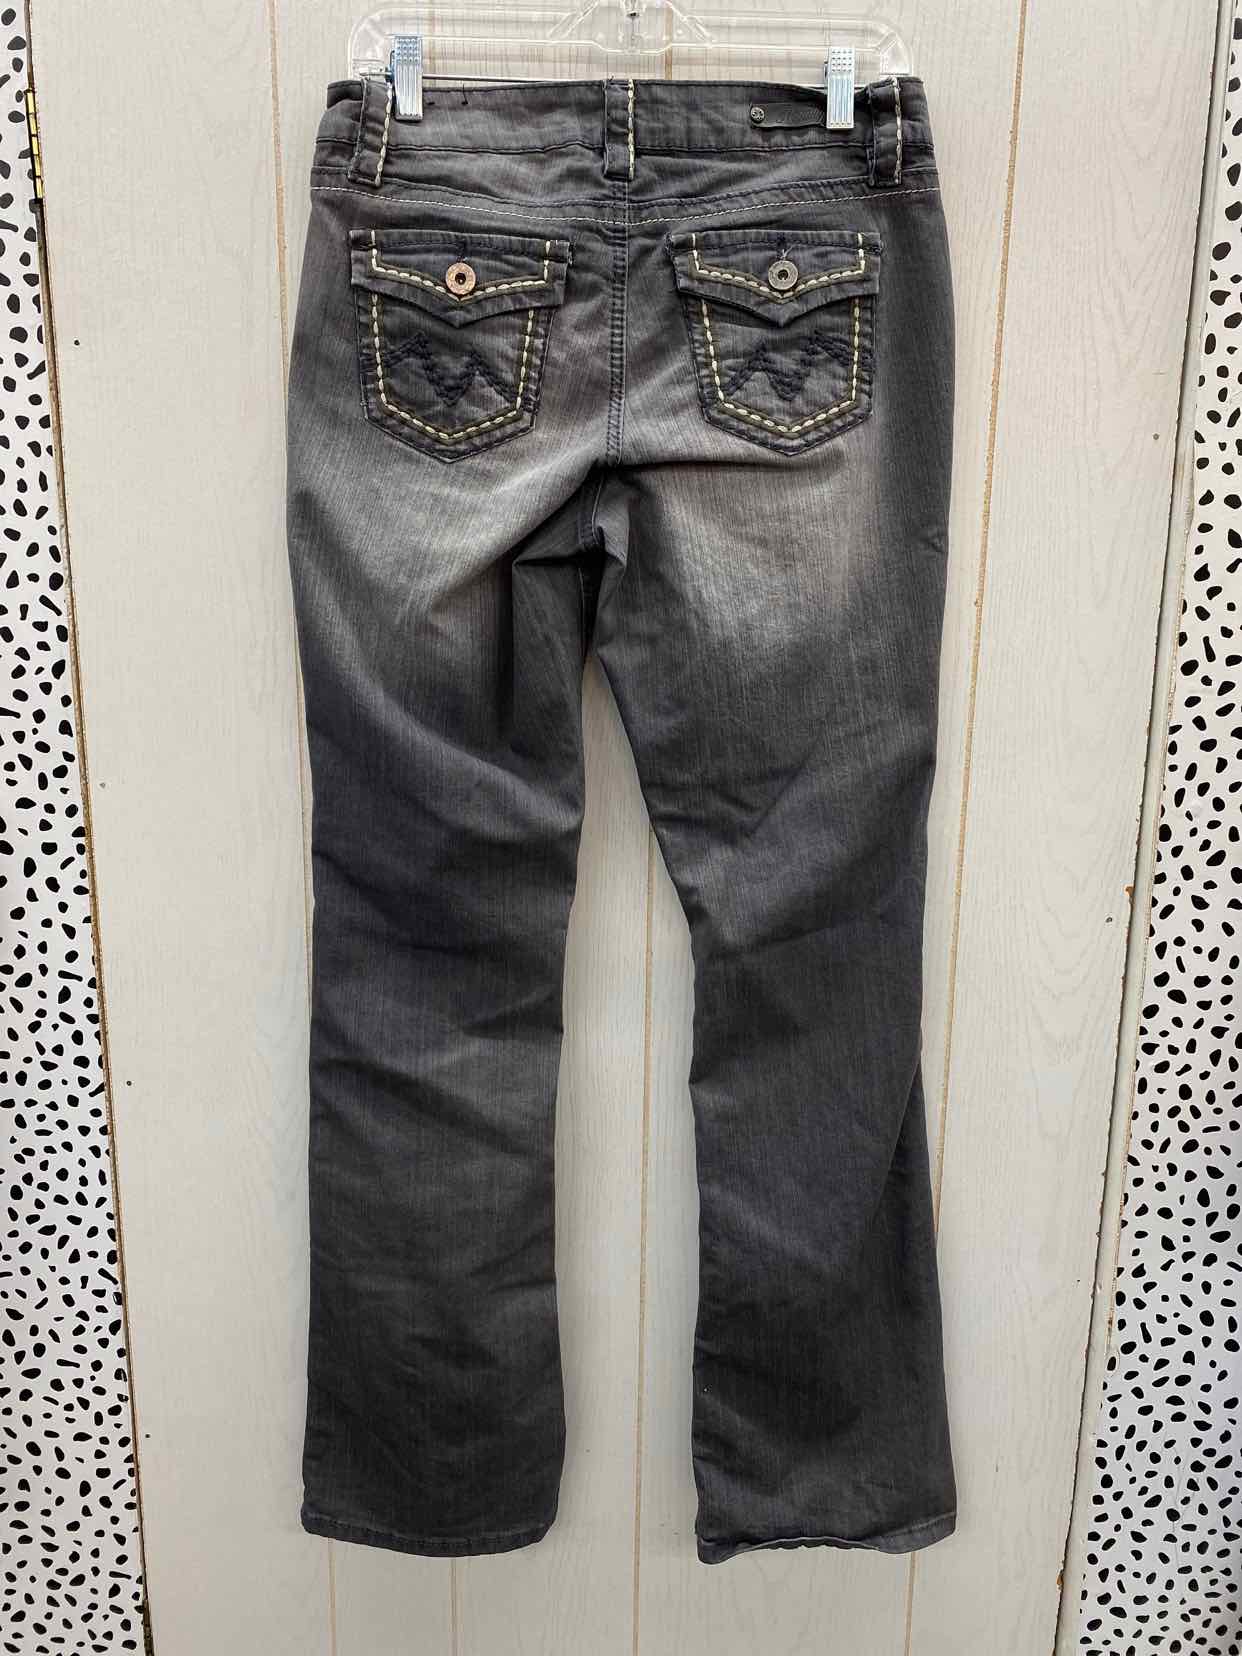 Shop for Size 6, Jeans, Womens